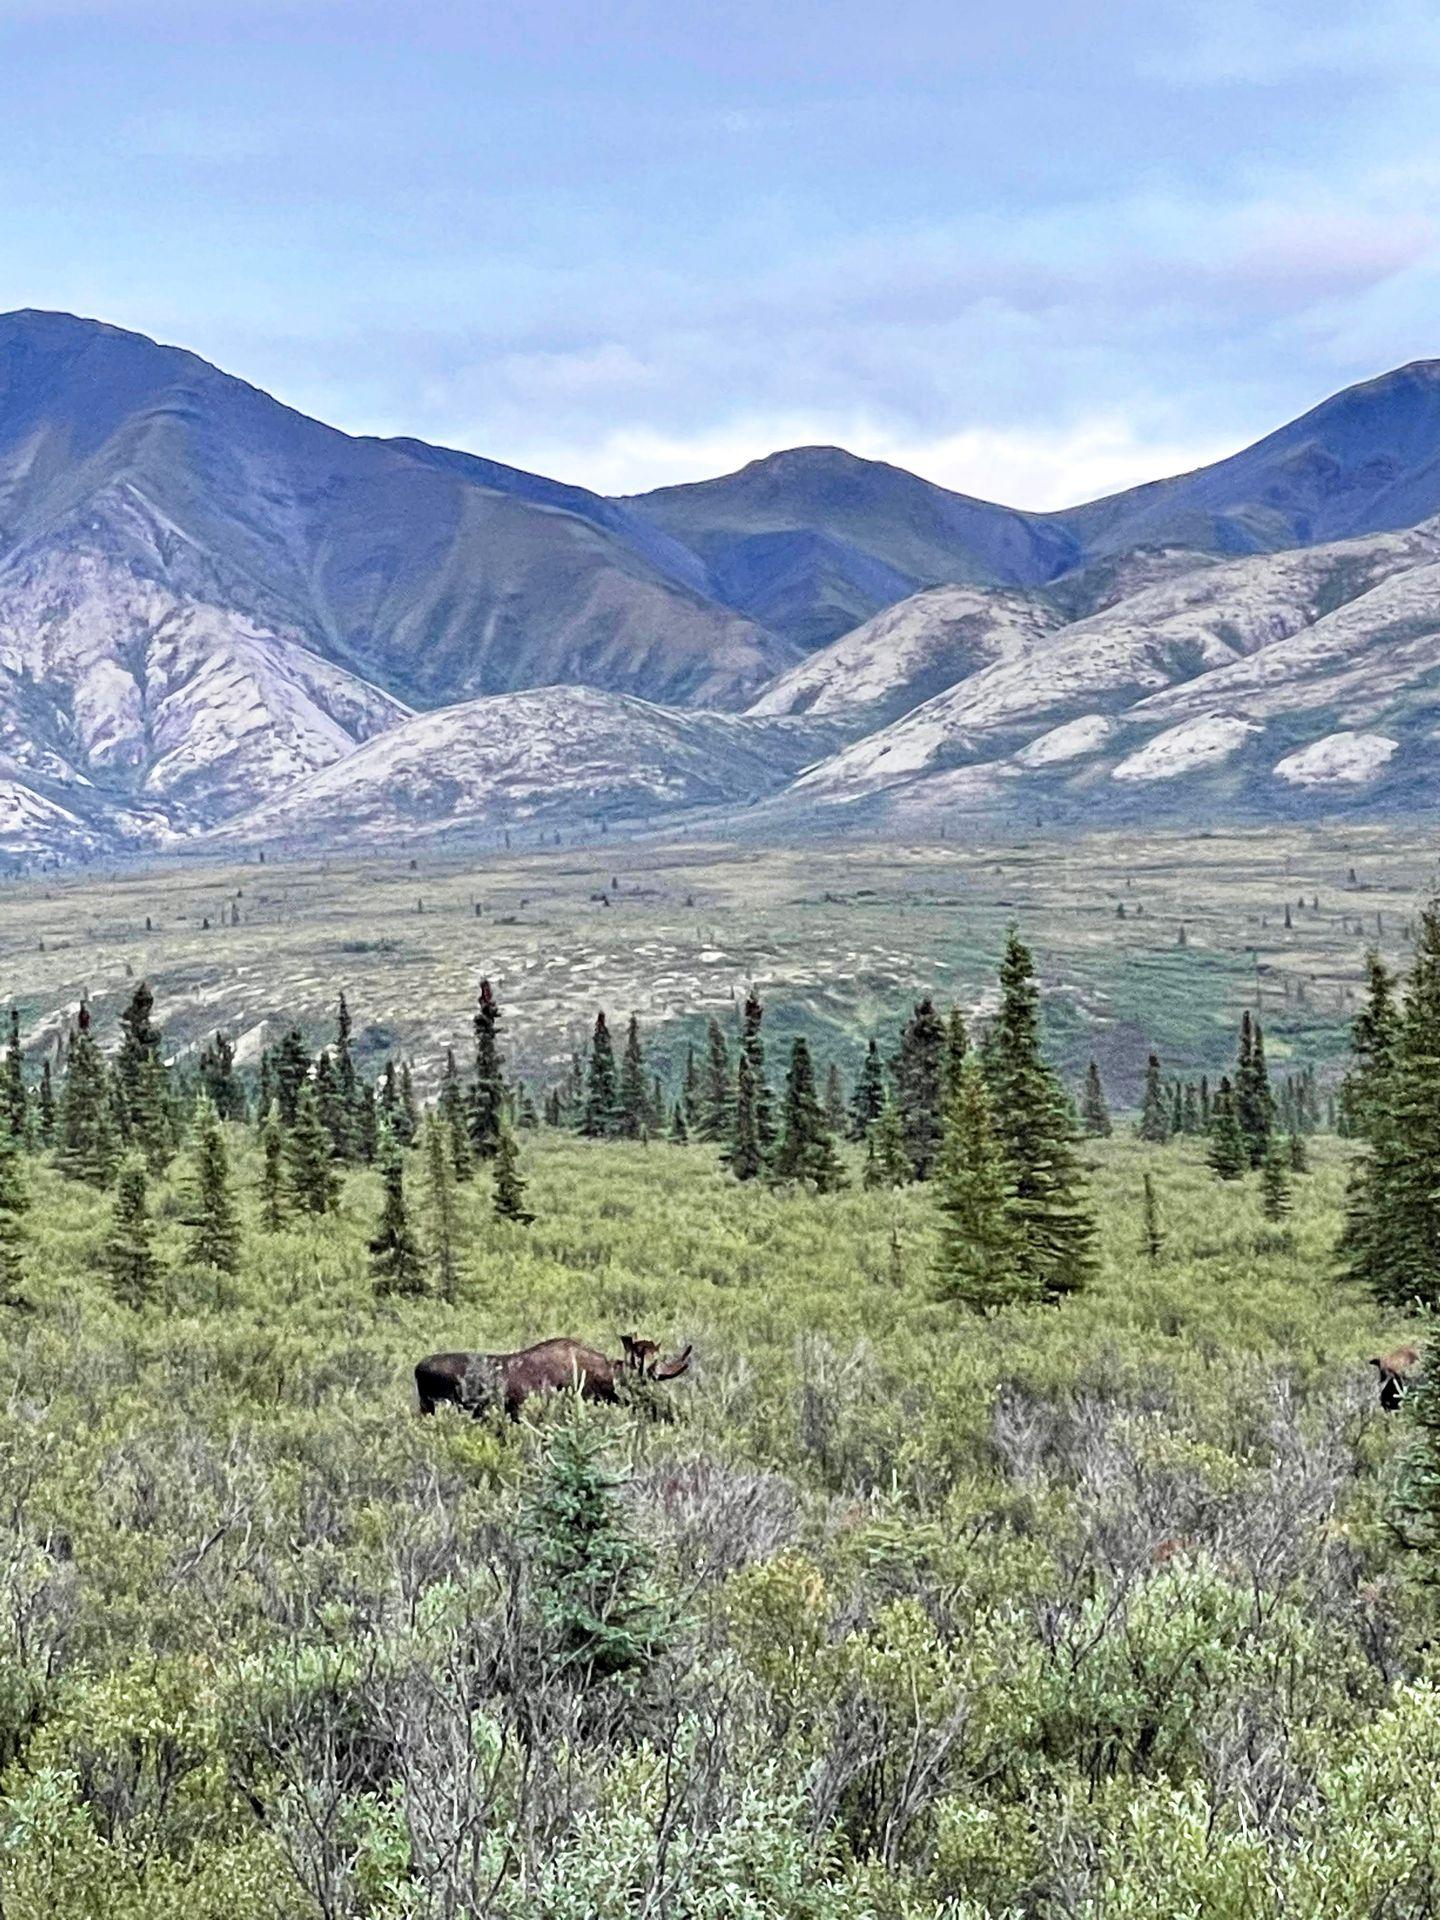 A moose eating greenery with mountains in the distance in Denali National Park.